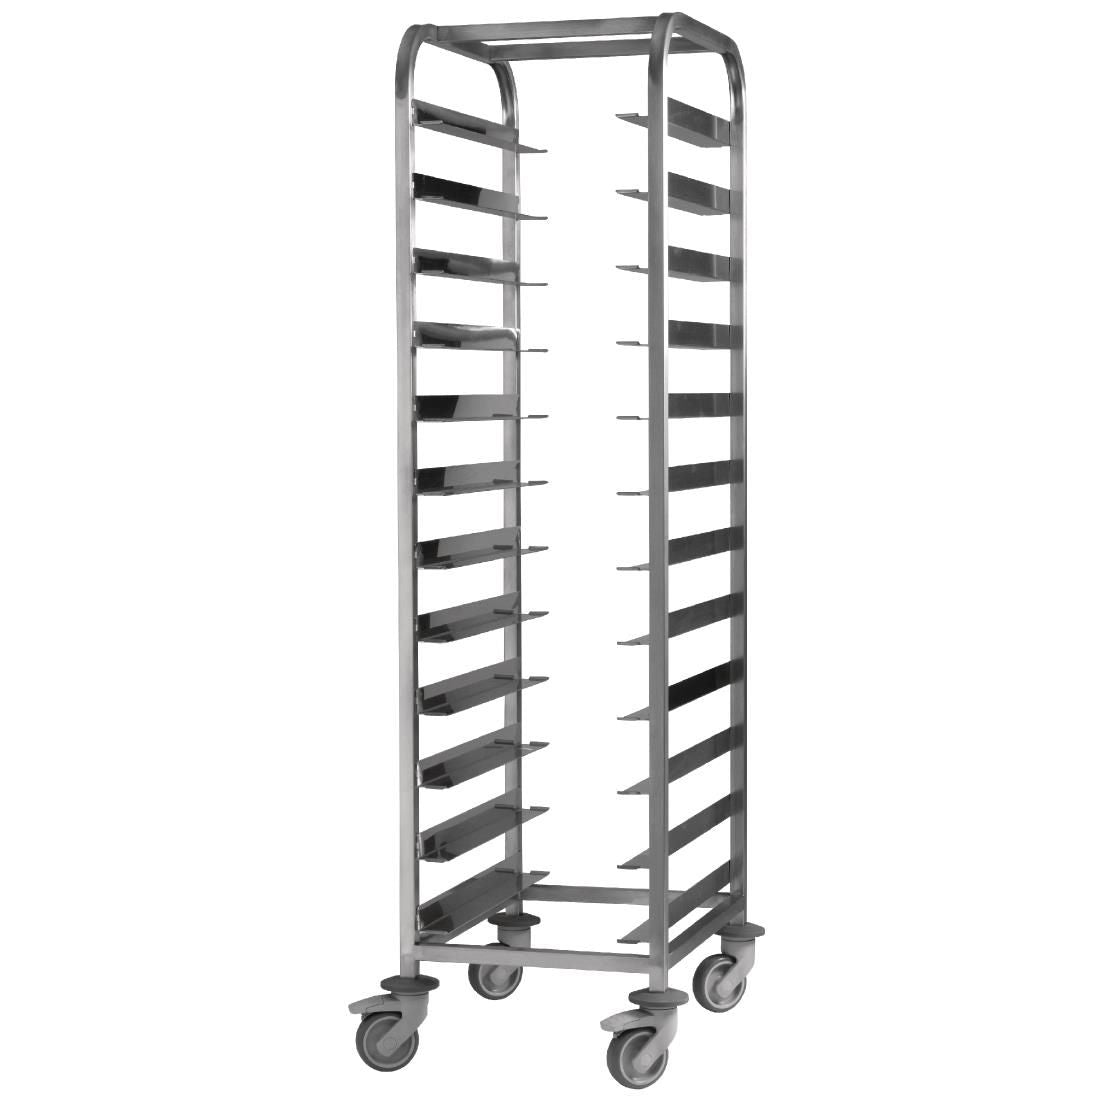 DP292 EAIS Stainless Steel Clearing Trolley 12 Shelves JD Catering Equipment Solutions Ltd